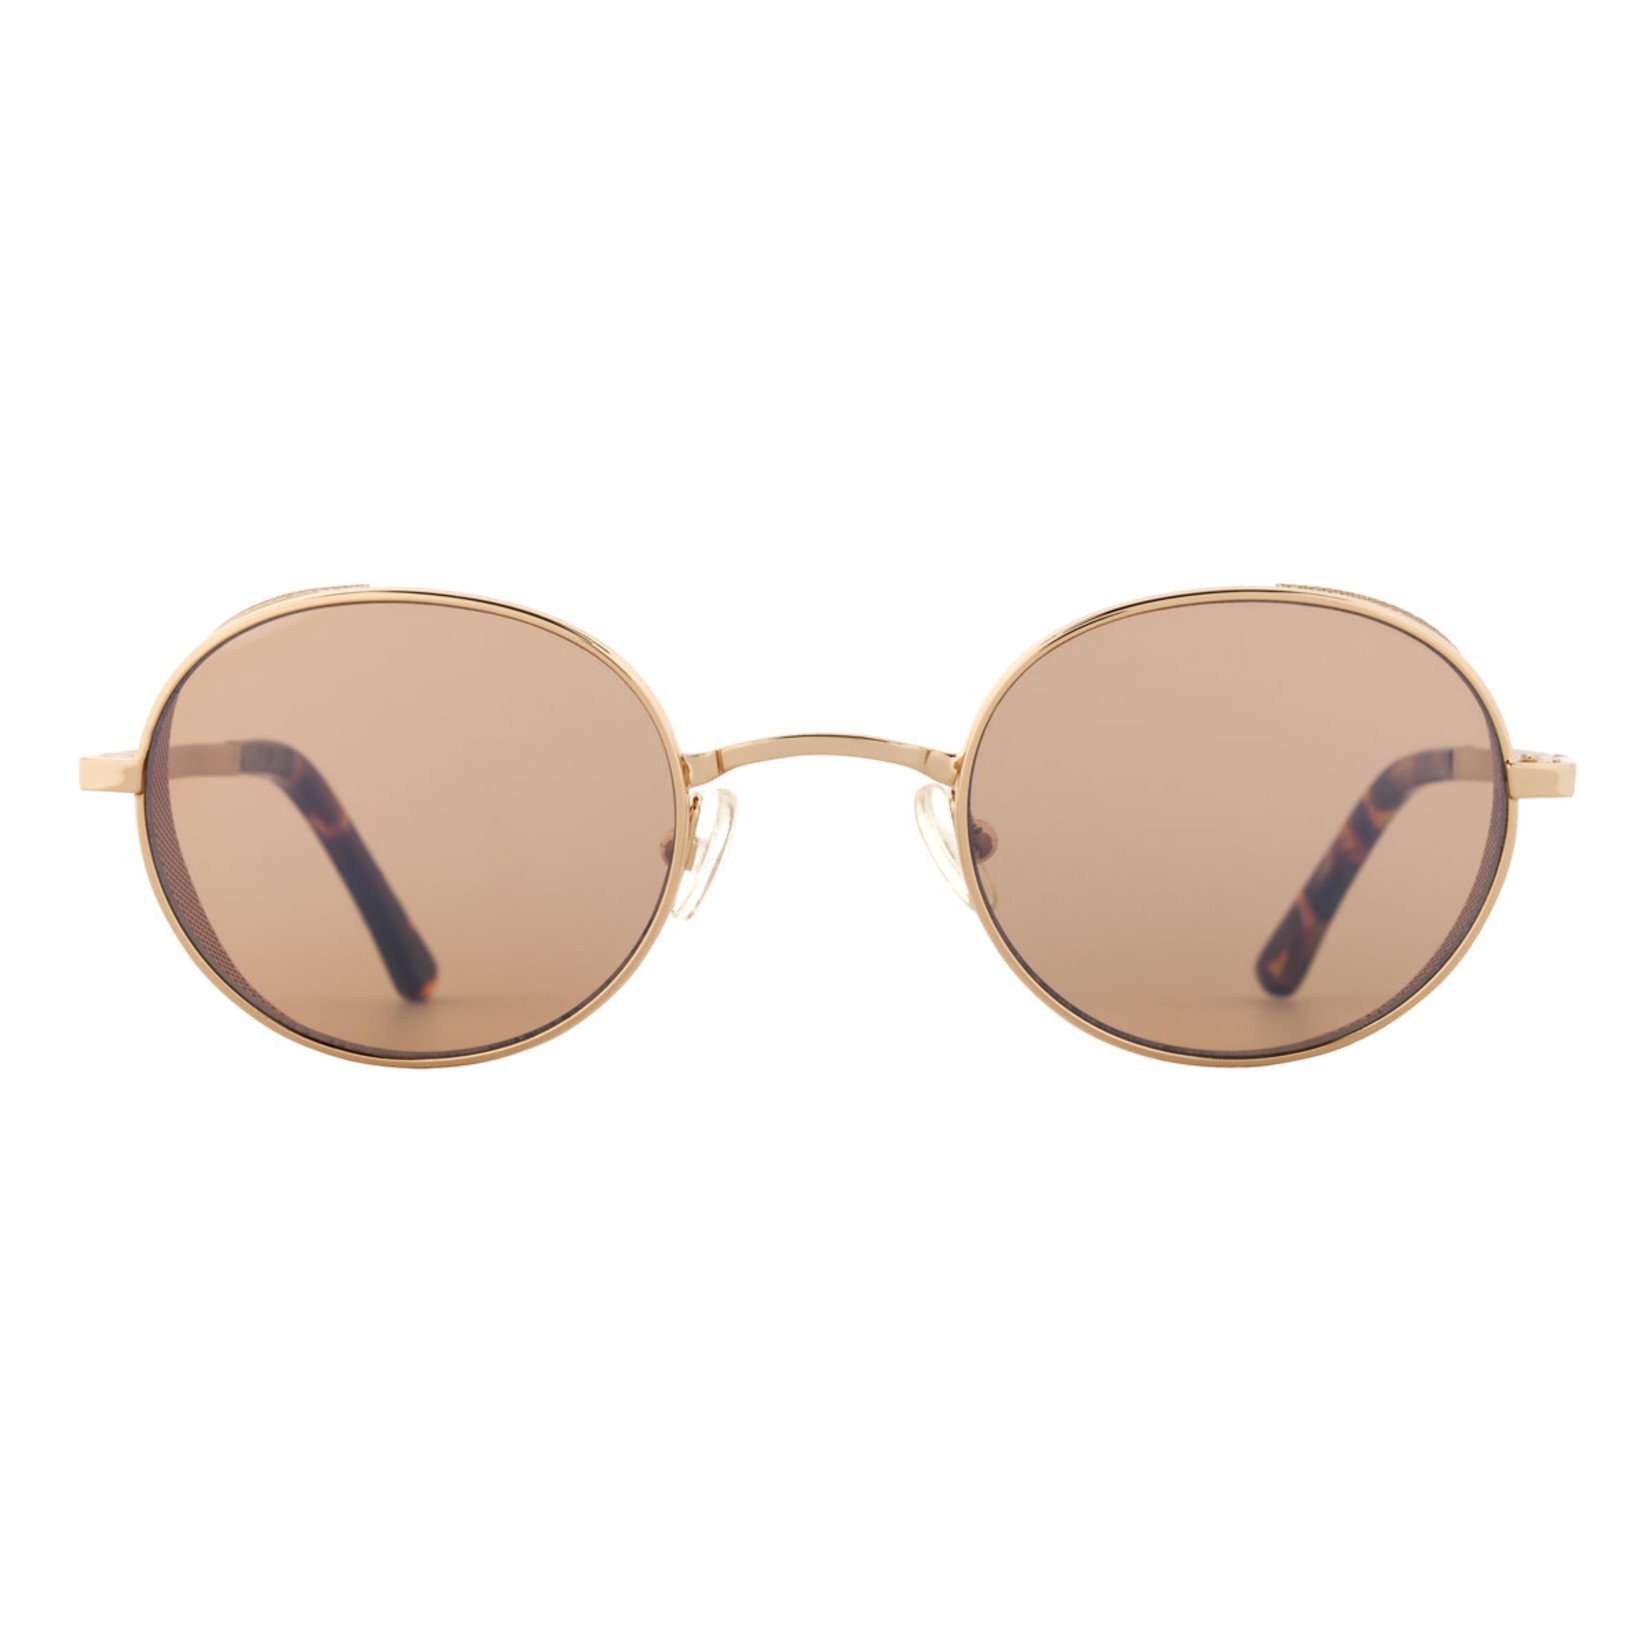 Amber Sceats Laurie Sunglasses